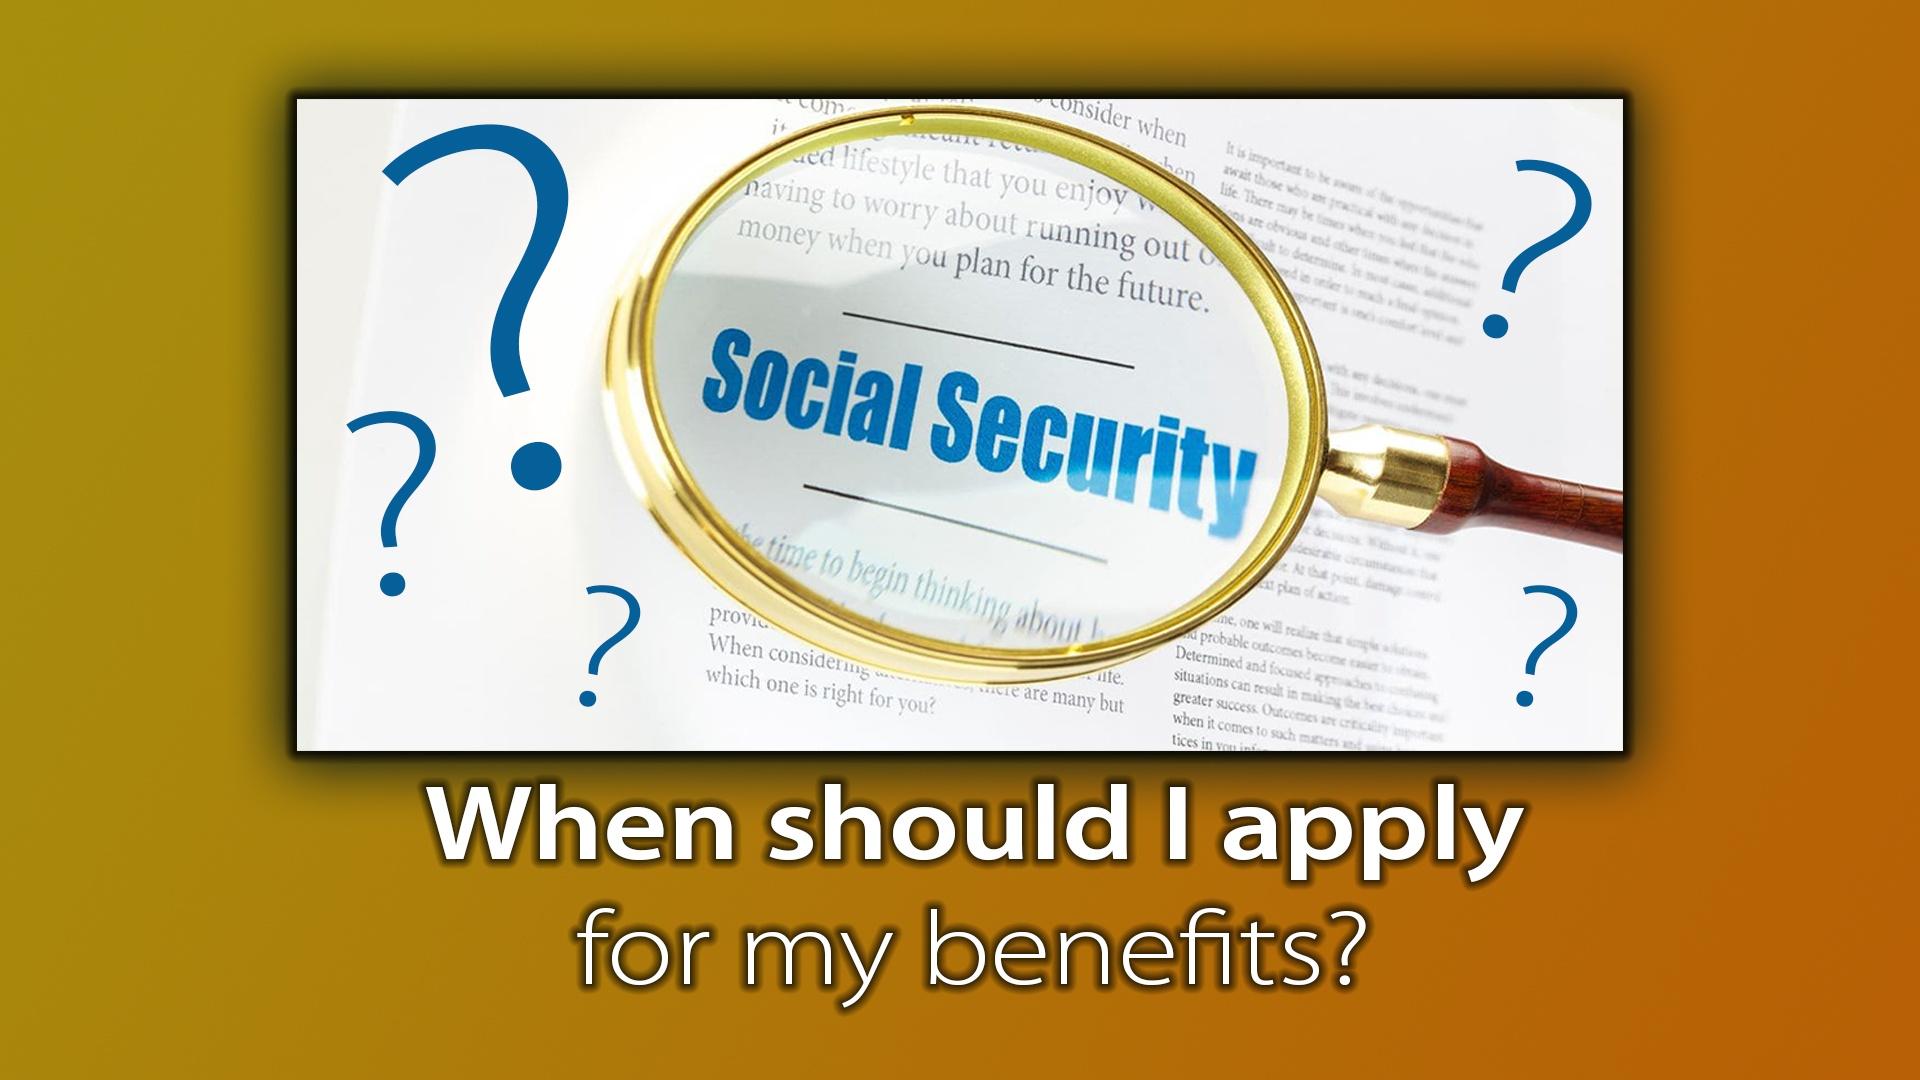 Social Security - When should I apply for my benefits?